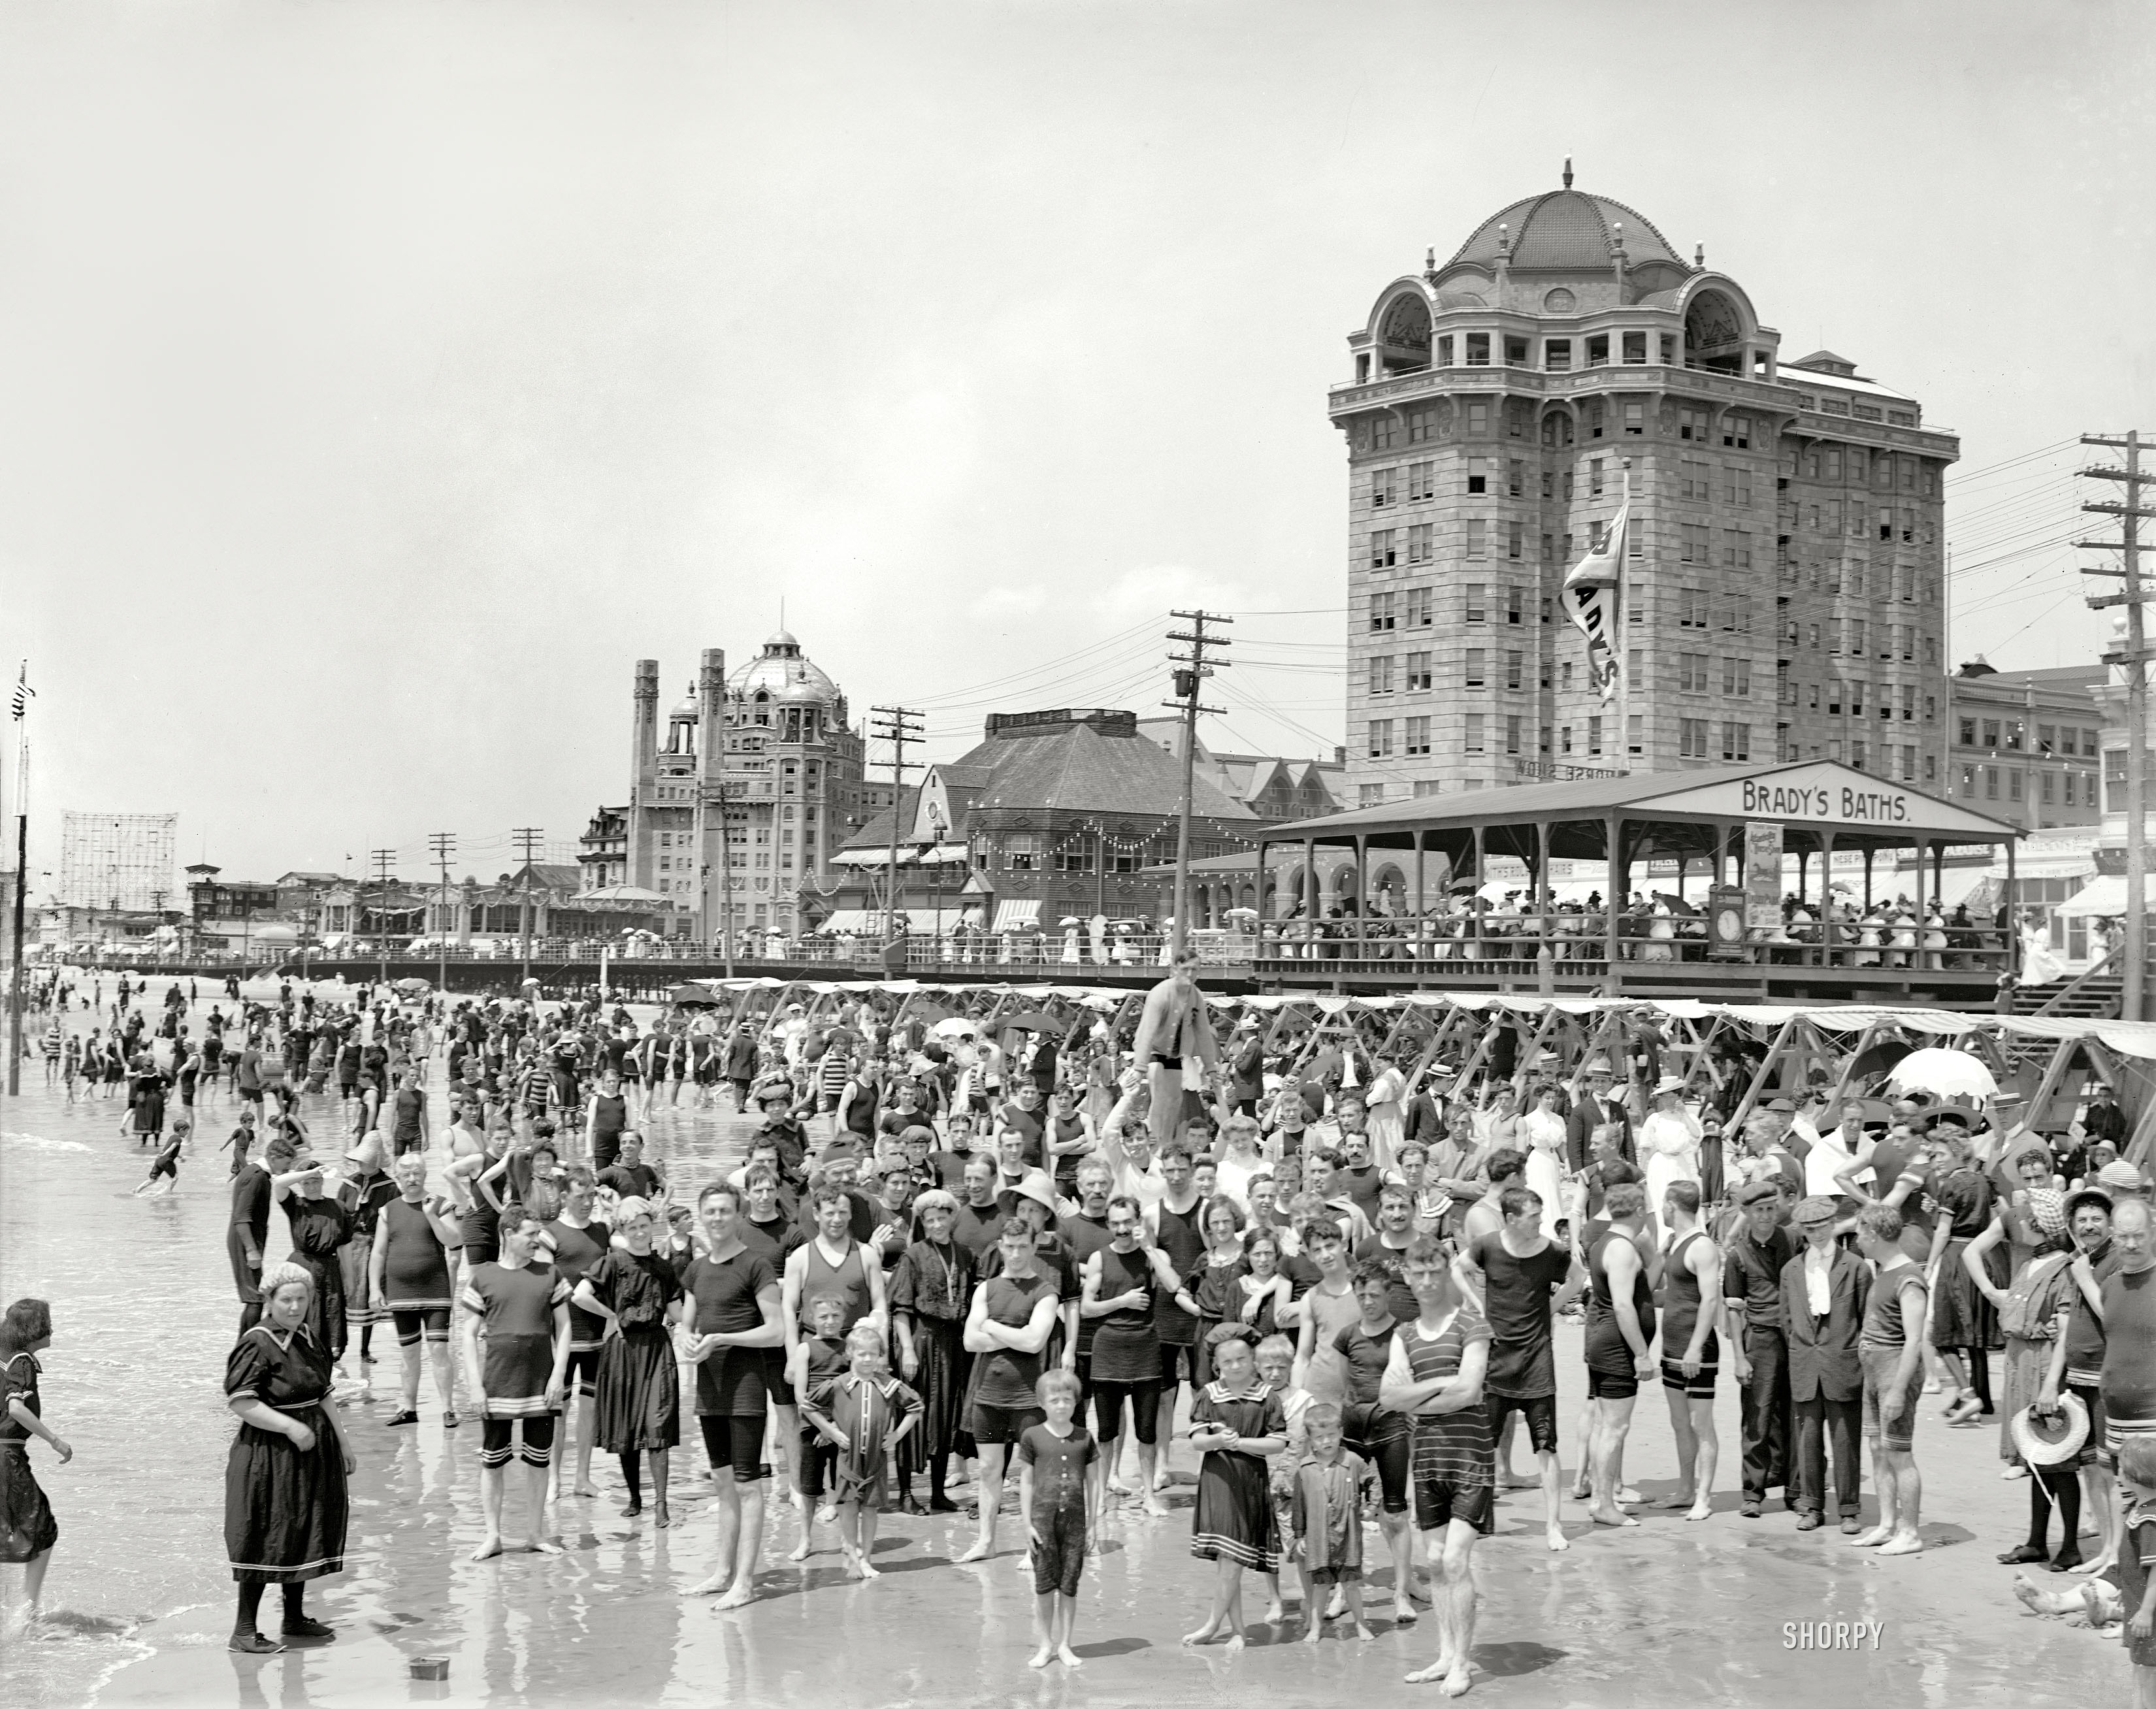 Circa 1906, Atlantic City bathers peering a century into the future. "Hotel Traymore and Brady's Baths." At left, the domed Marlborough-Blenheim hotel. 8x10 inch dry plate glass negative, Detroit Publishing Company. View full size.